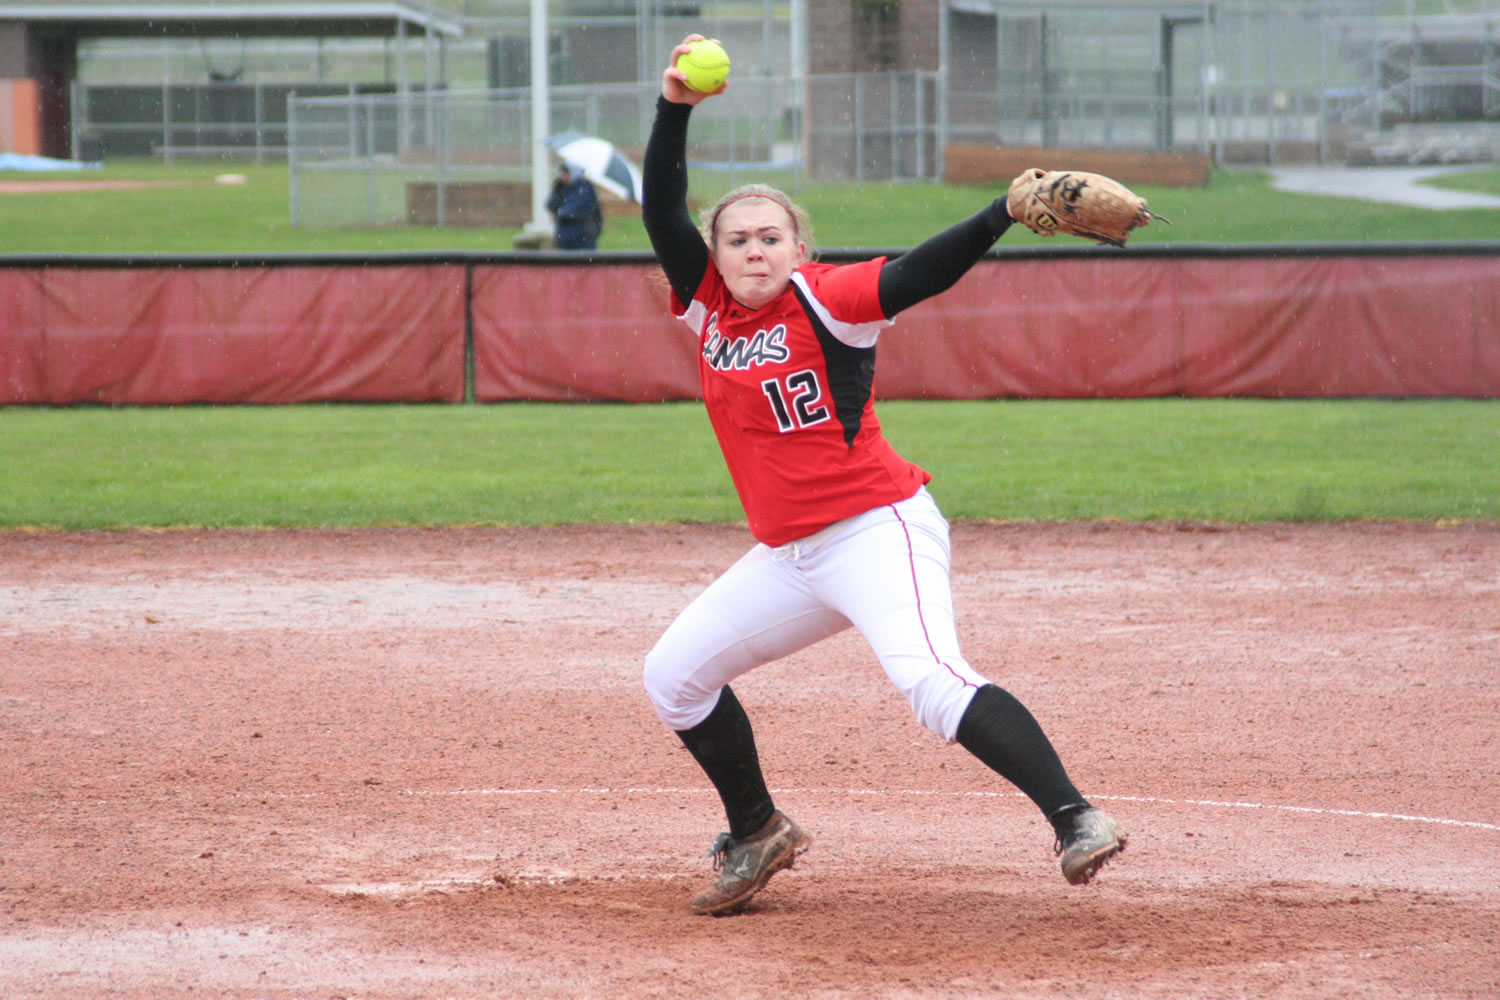 Sarah Nidick winds up a pitch for the Papermakers in the rain Monday, at Camas High School.